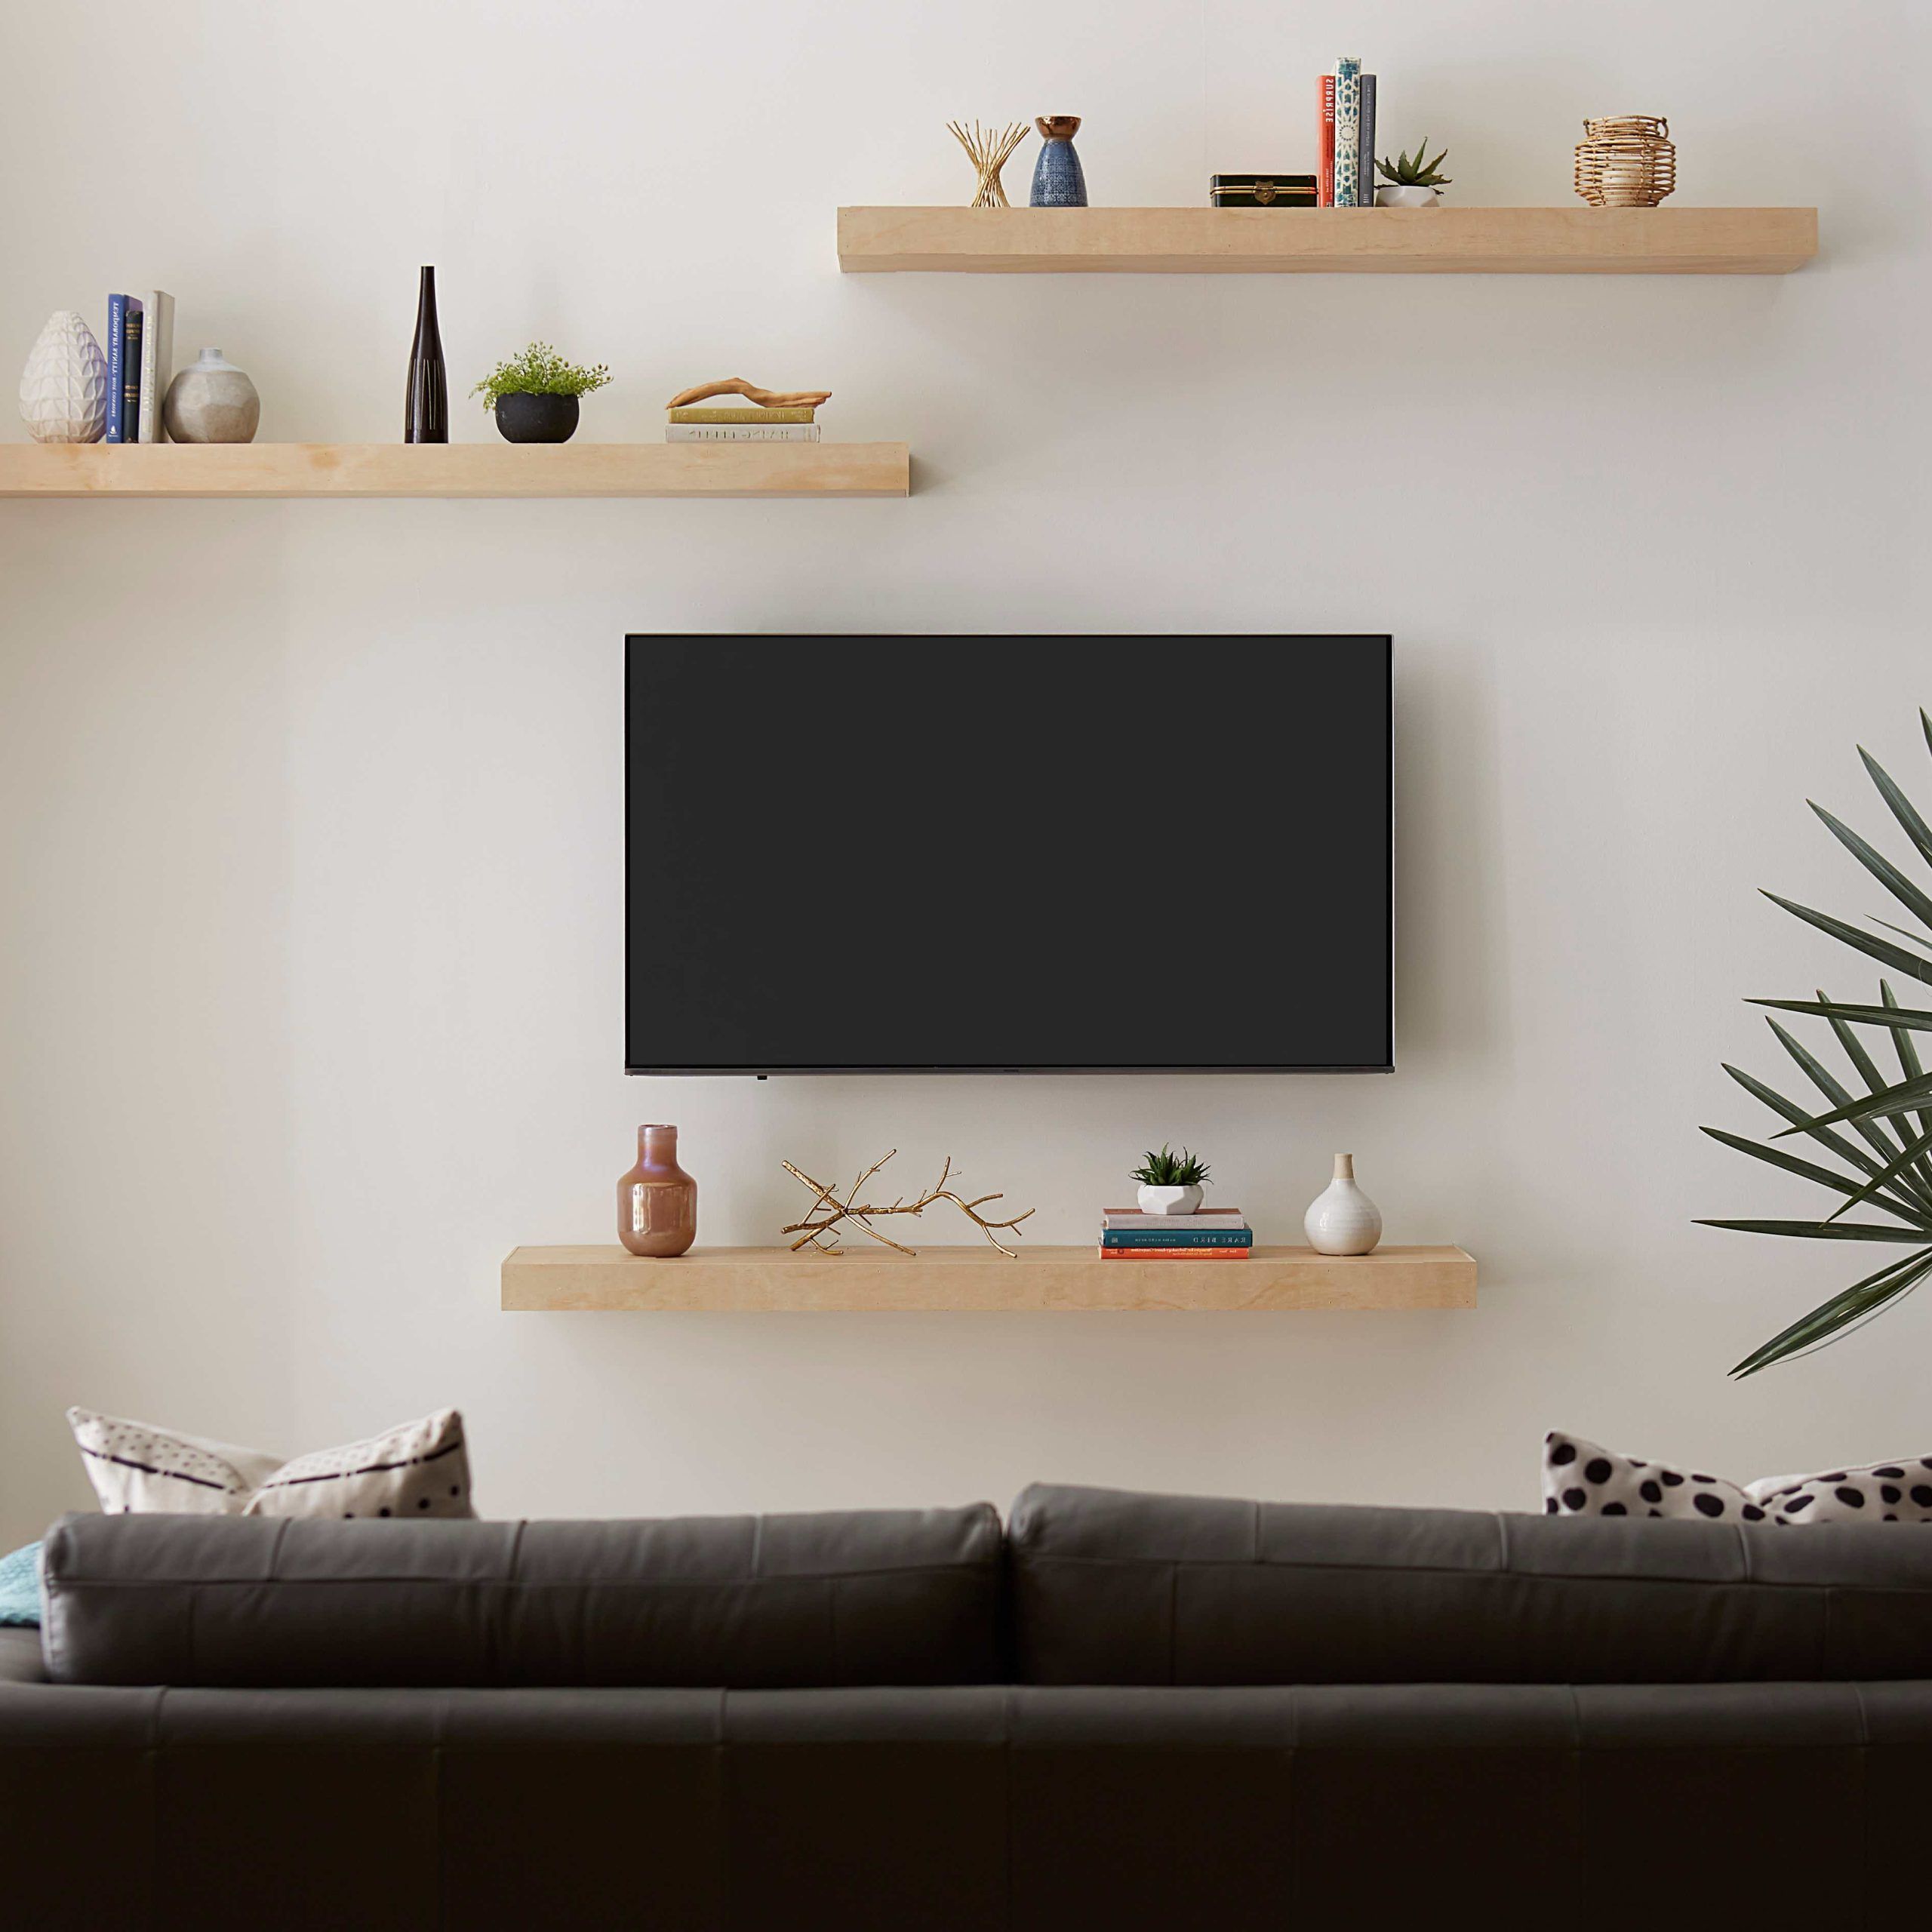 How To Decorate Around Your Tv With Floating Shelves Inside Floating Stands For Tvs (View 13 of 20)